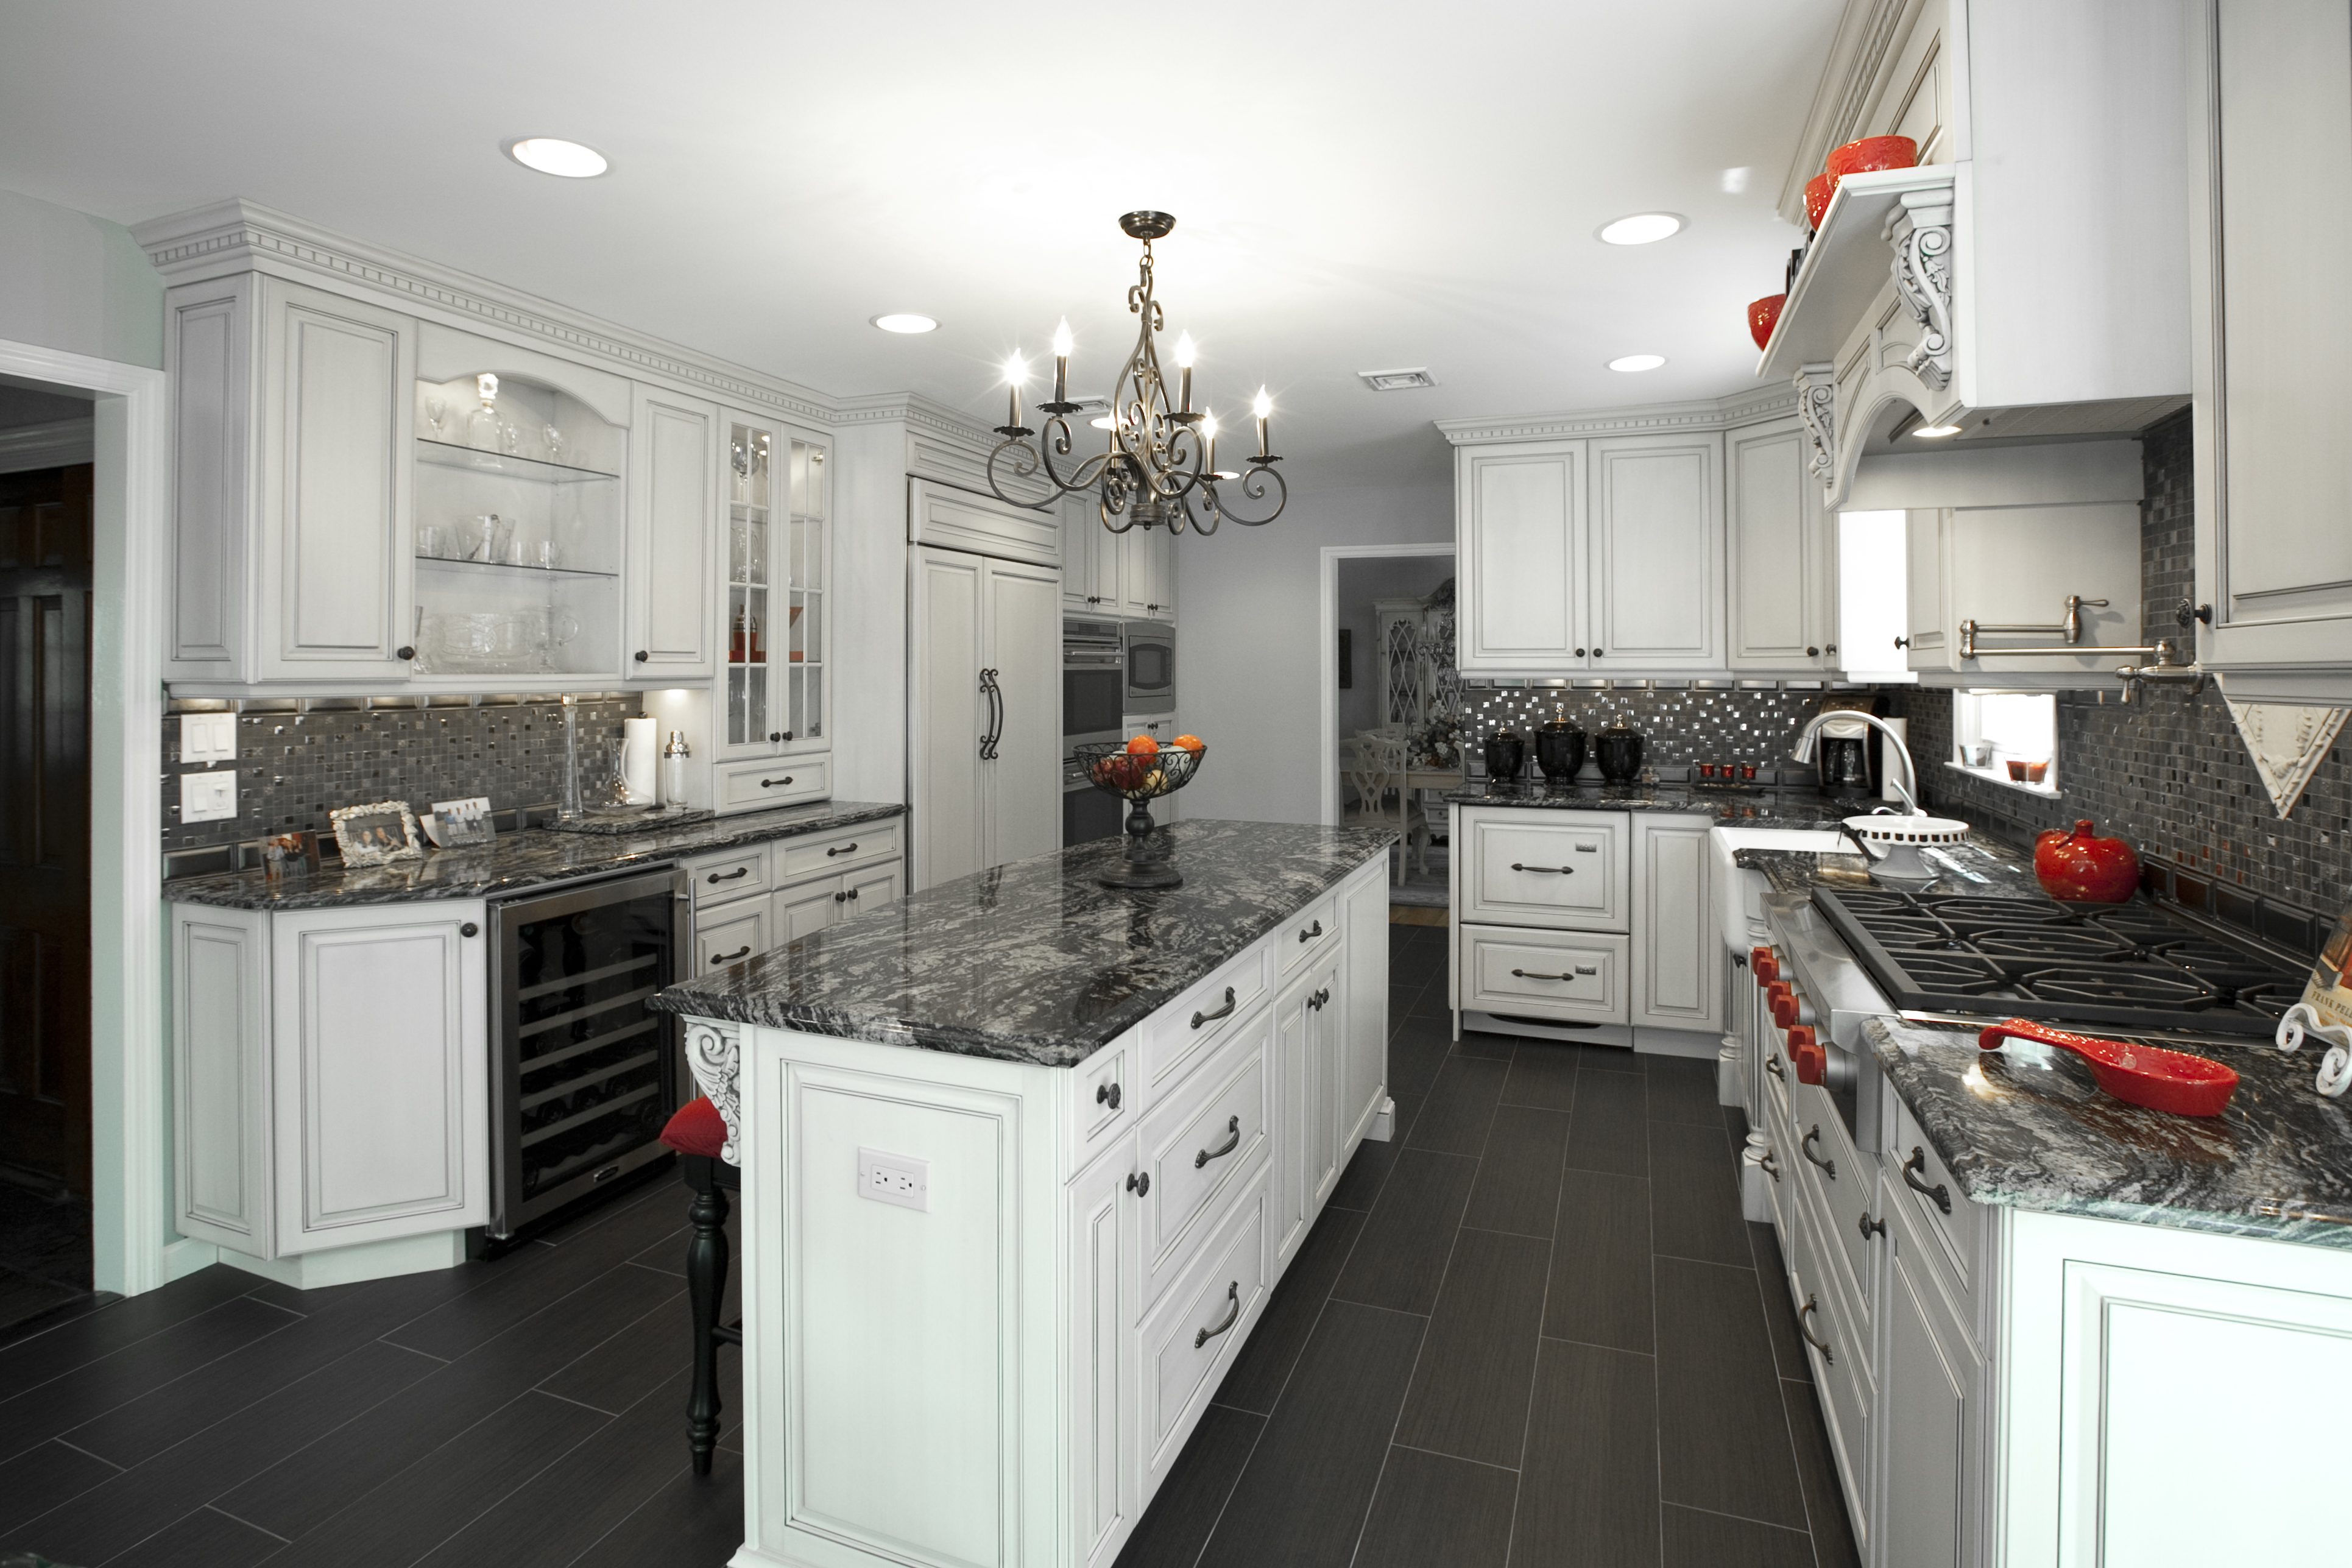 Black And White Kitchen Designs From Mobalpa - Home Design